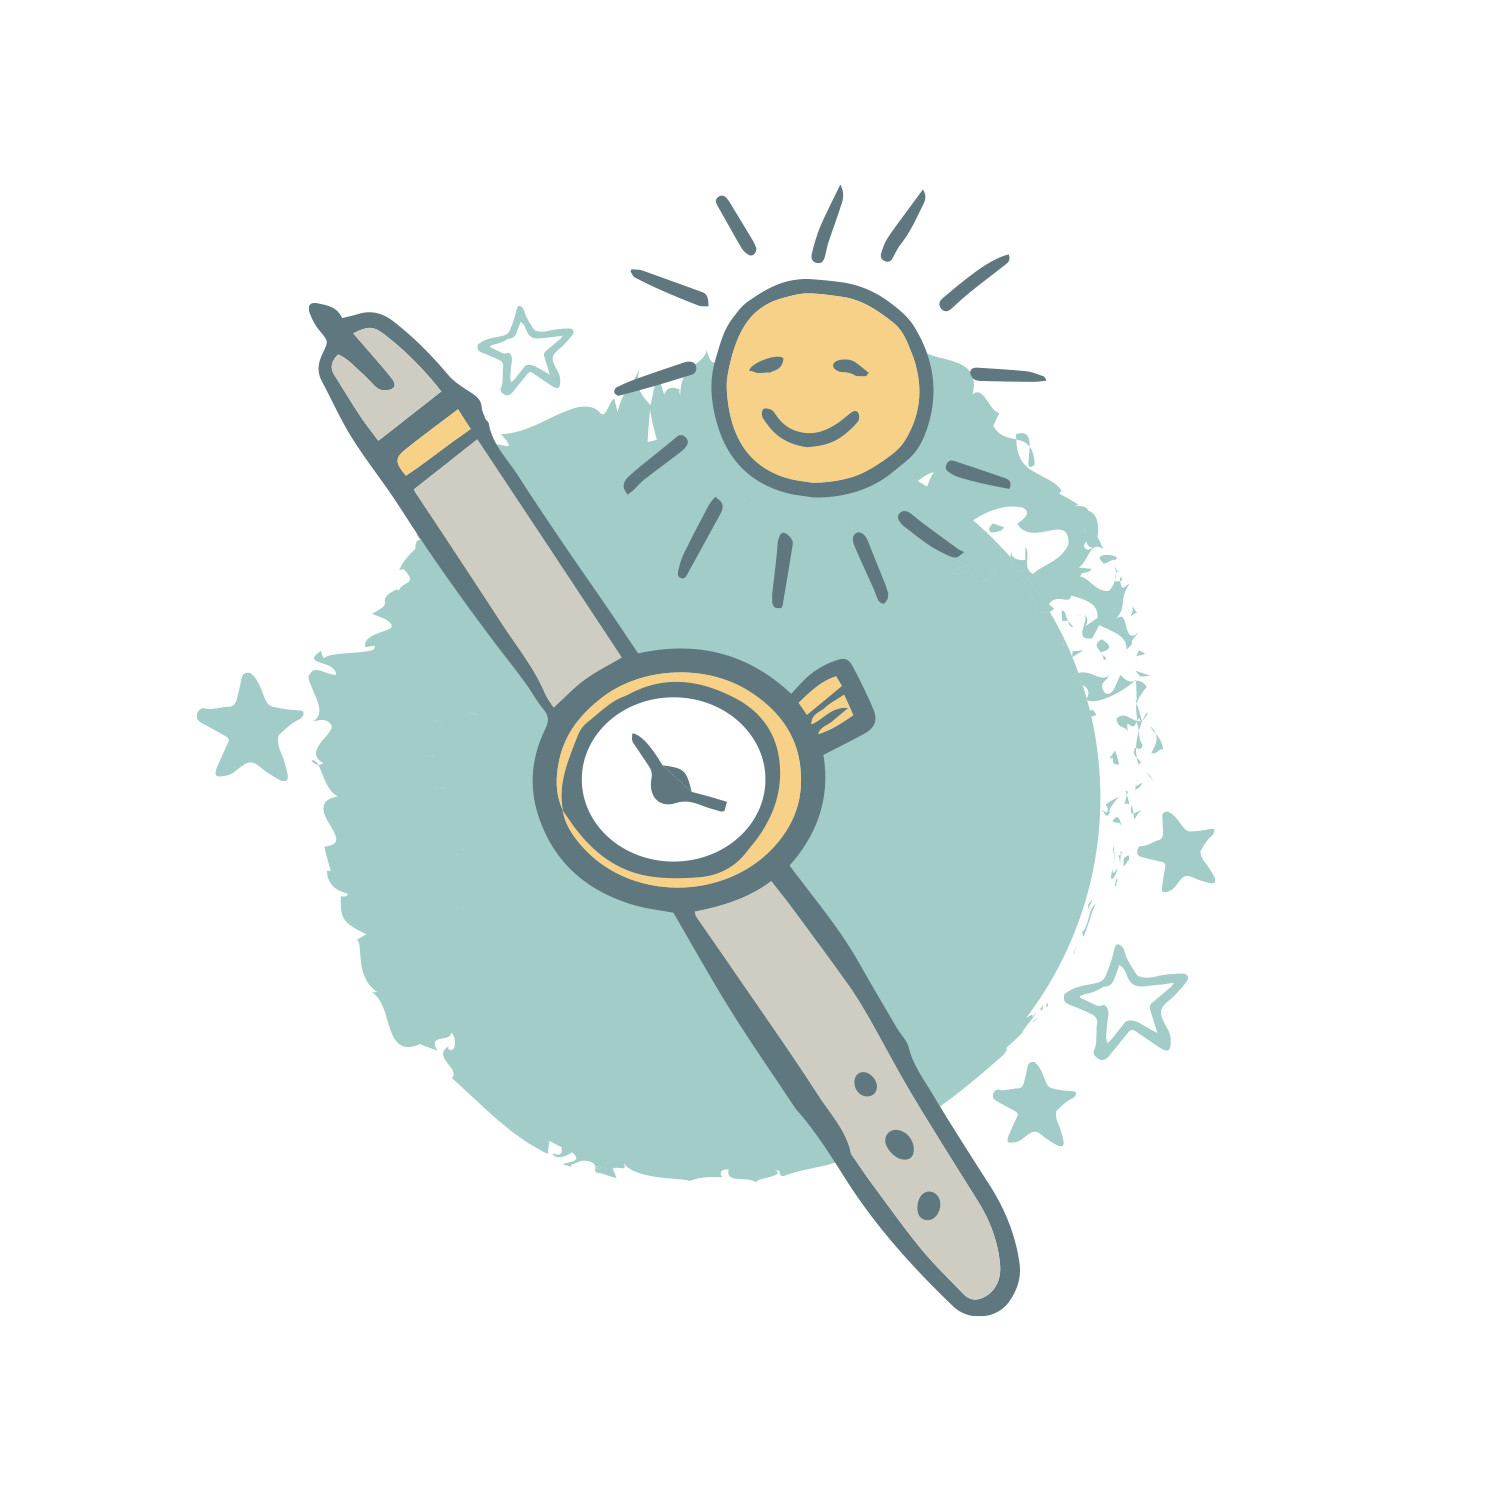 Drawn image of a watch and a smiling sunshine